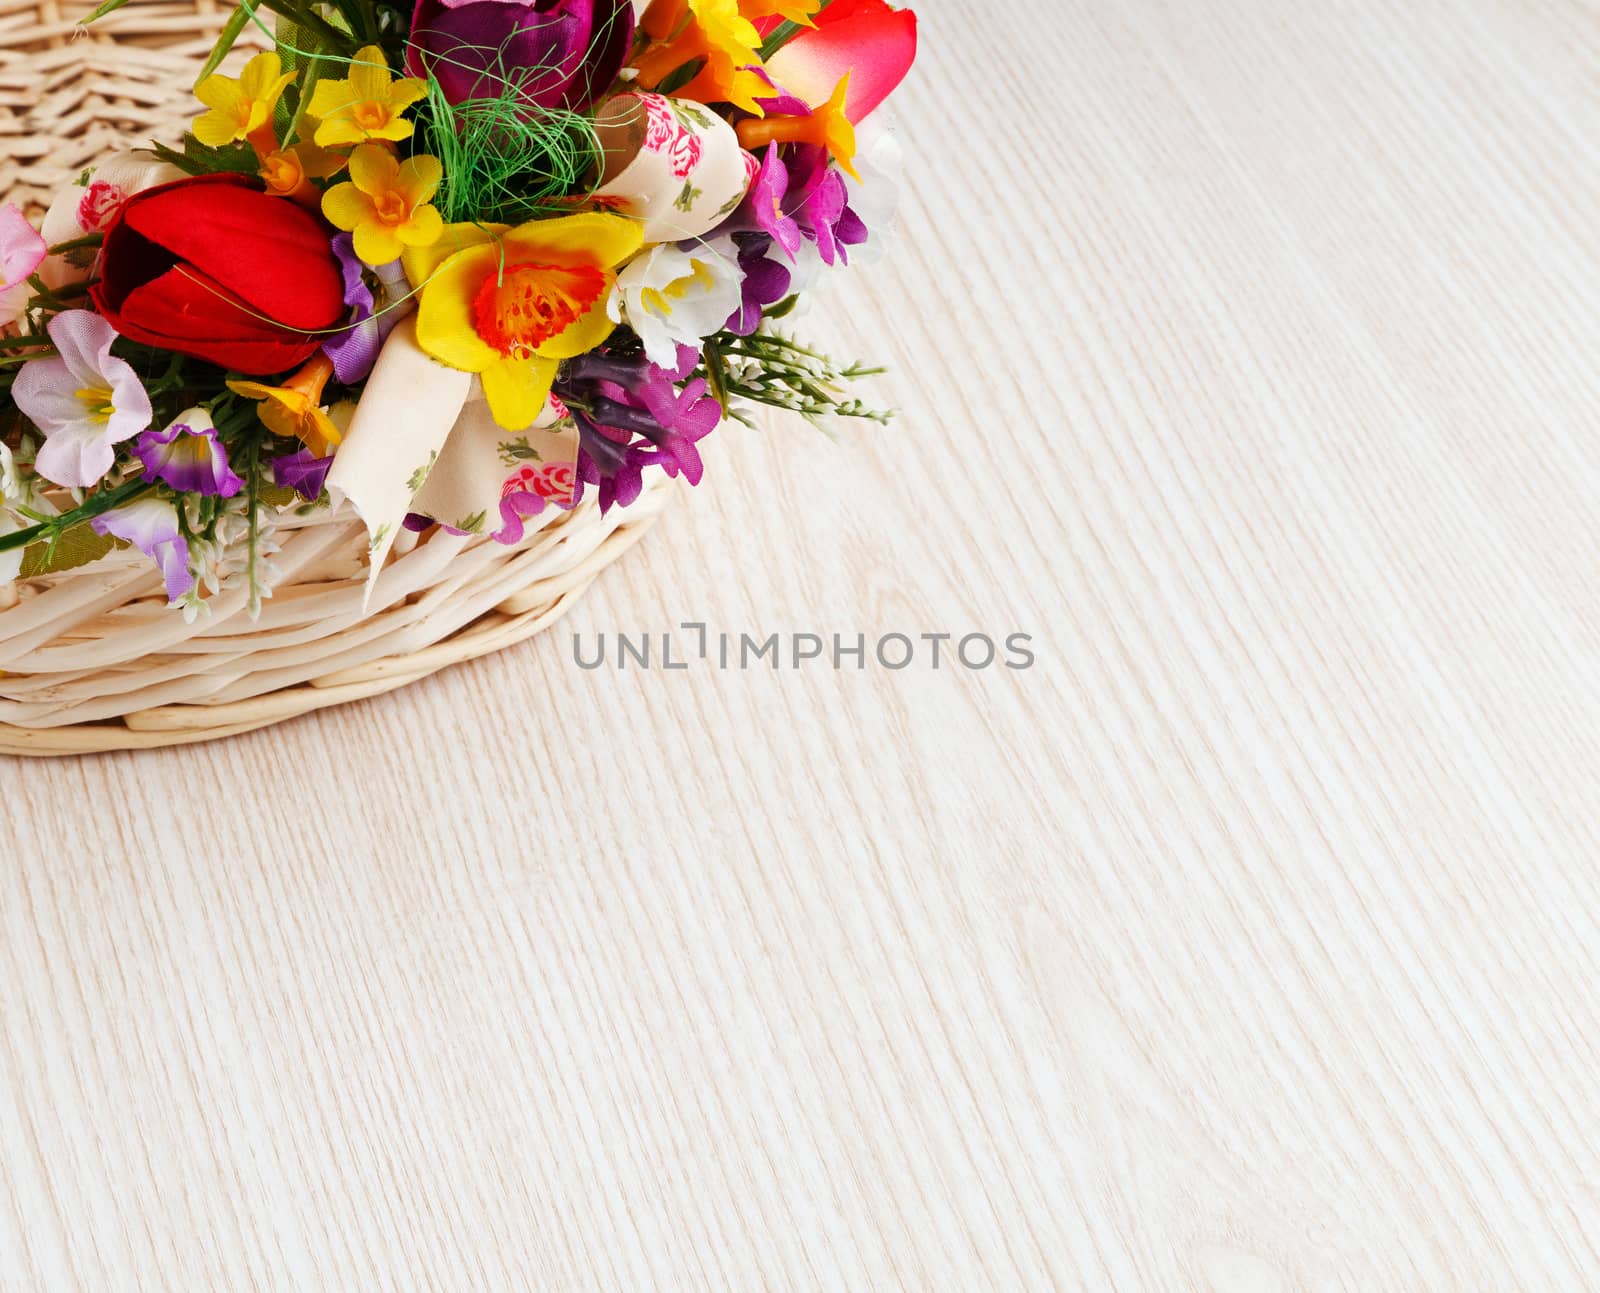 artifical flowers on a wooden background